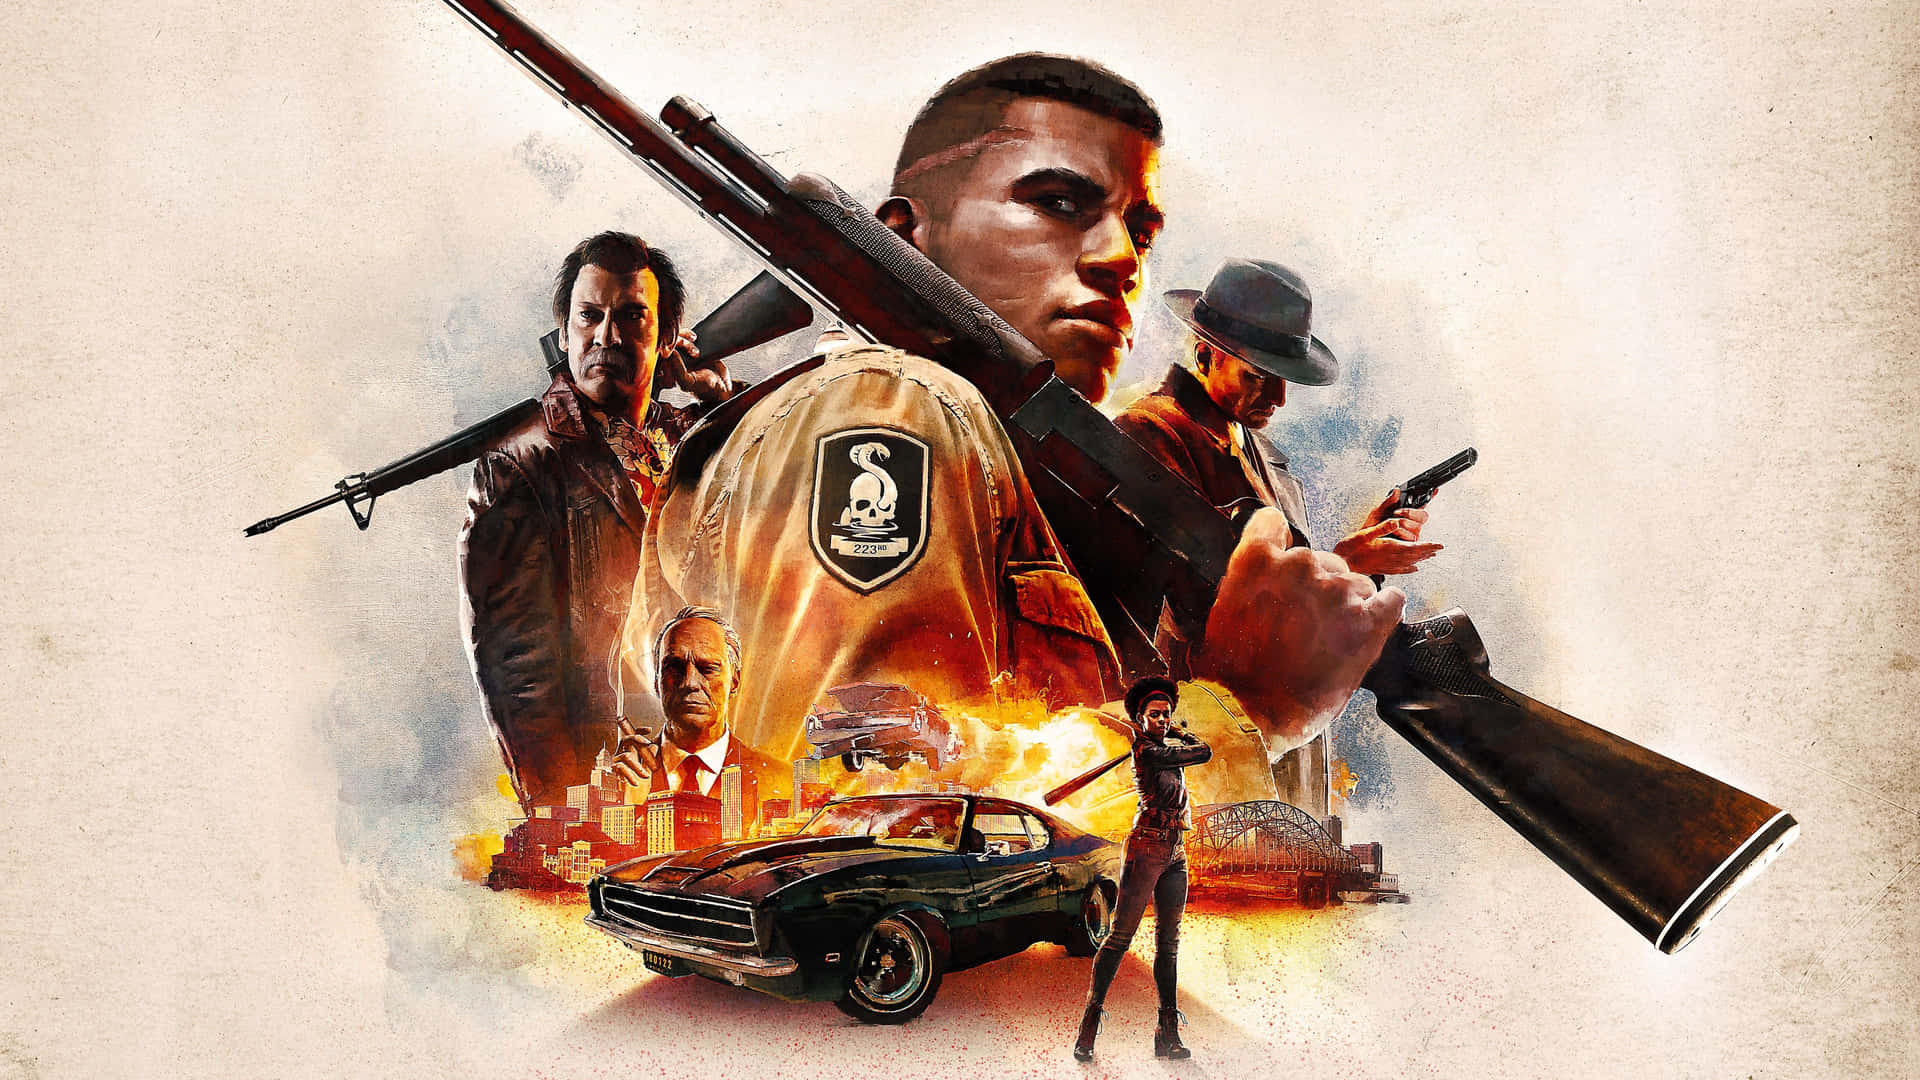 Mafia Iii Gangsters With Guns In Game Poster Wallpaper